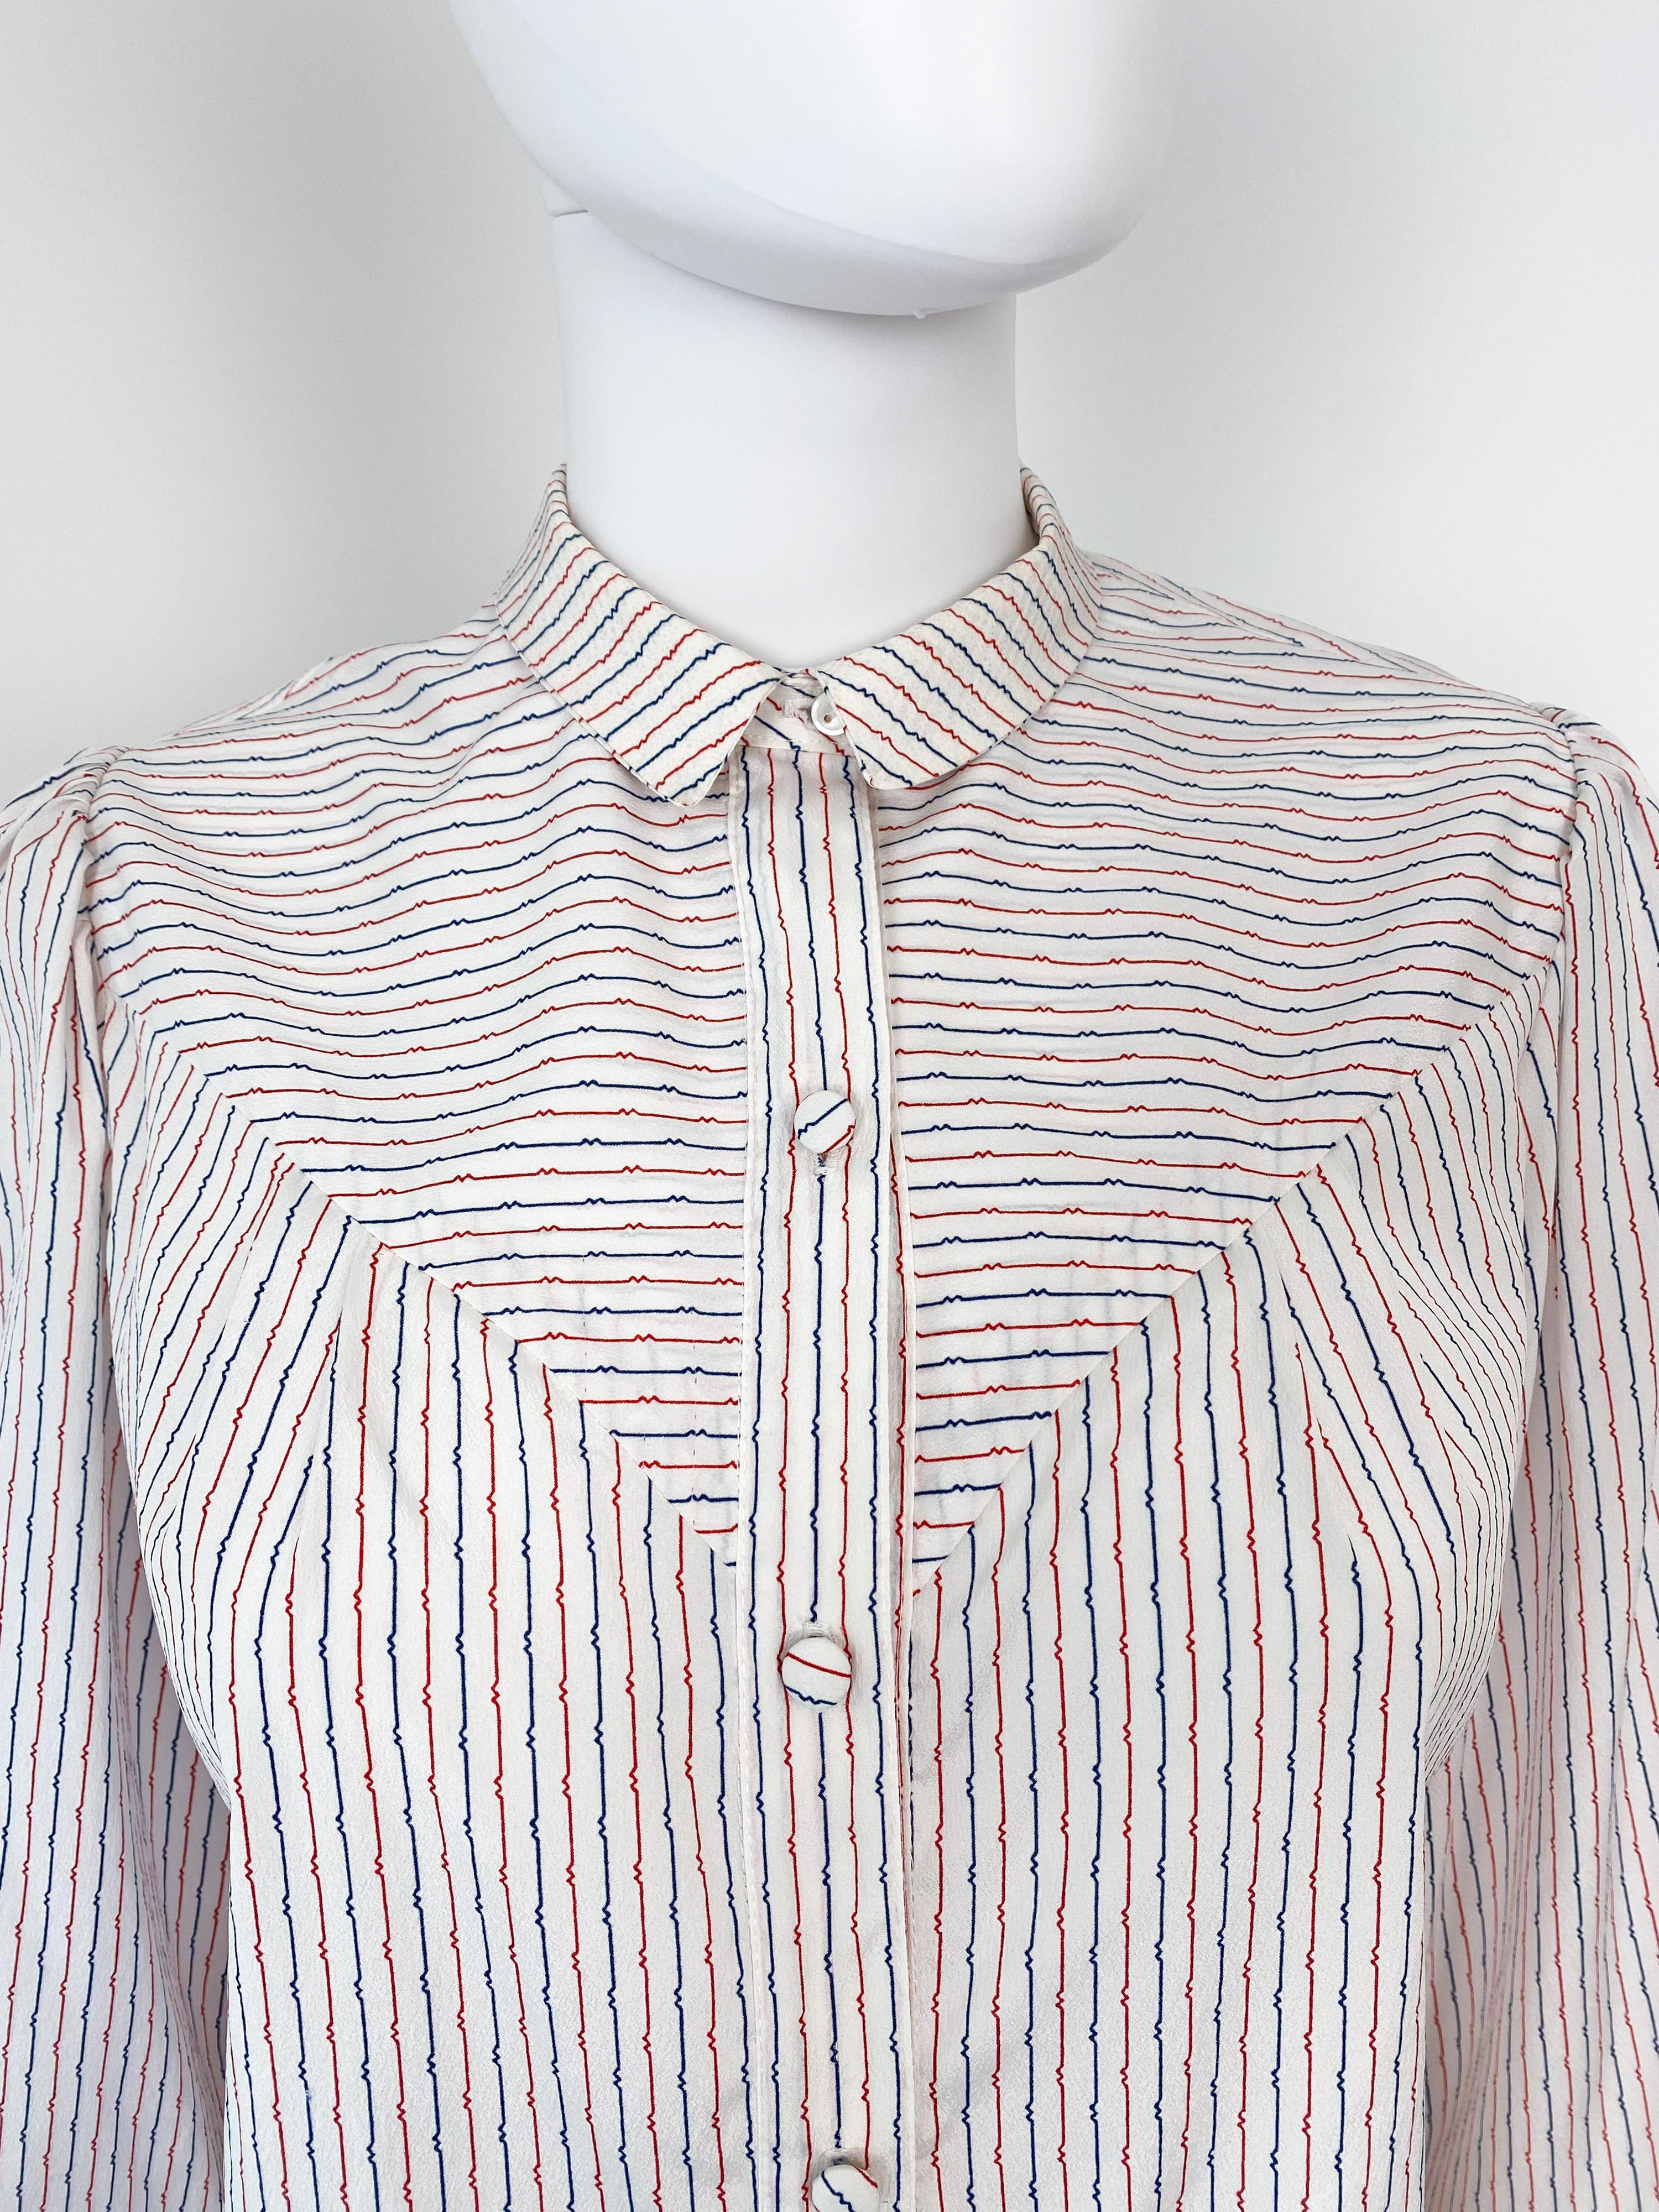 Women's or Men's Vintage 1980s Silky Polyester Western Blouse Top Red and Blue Stripes Size 10/12 For Sale